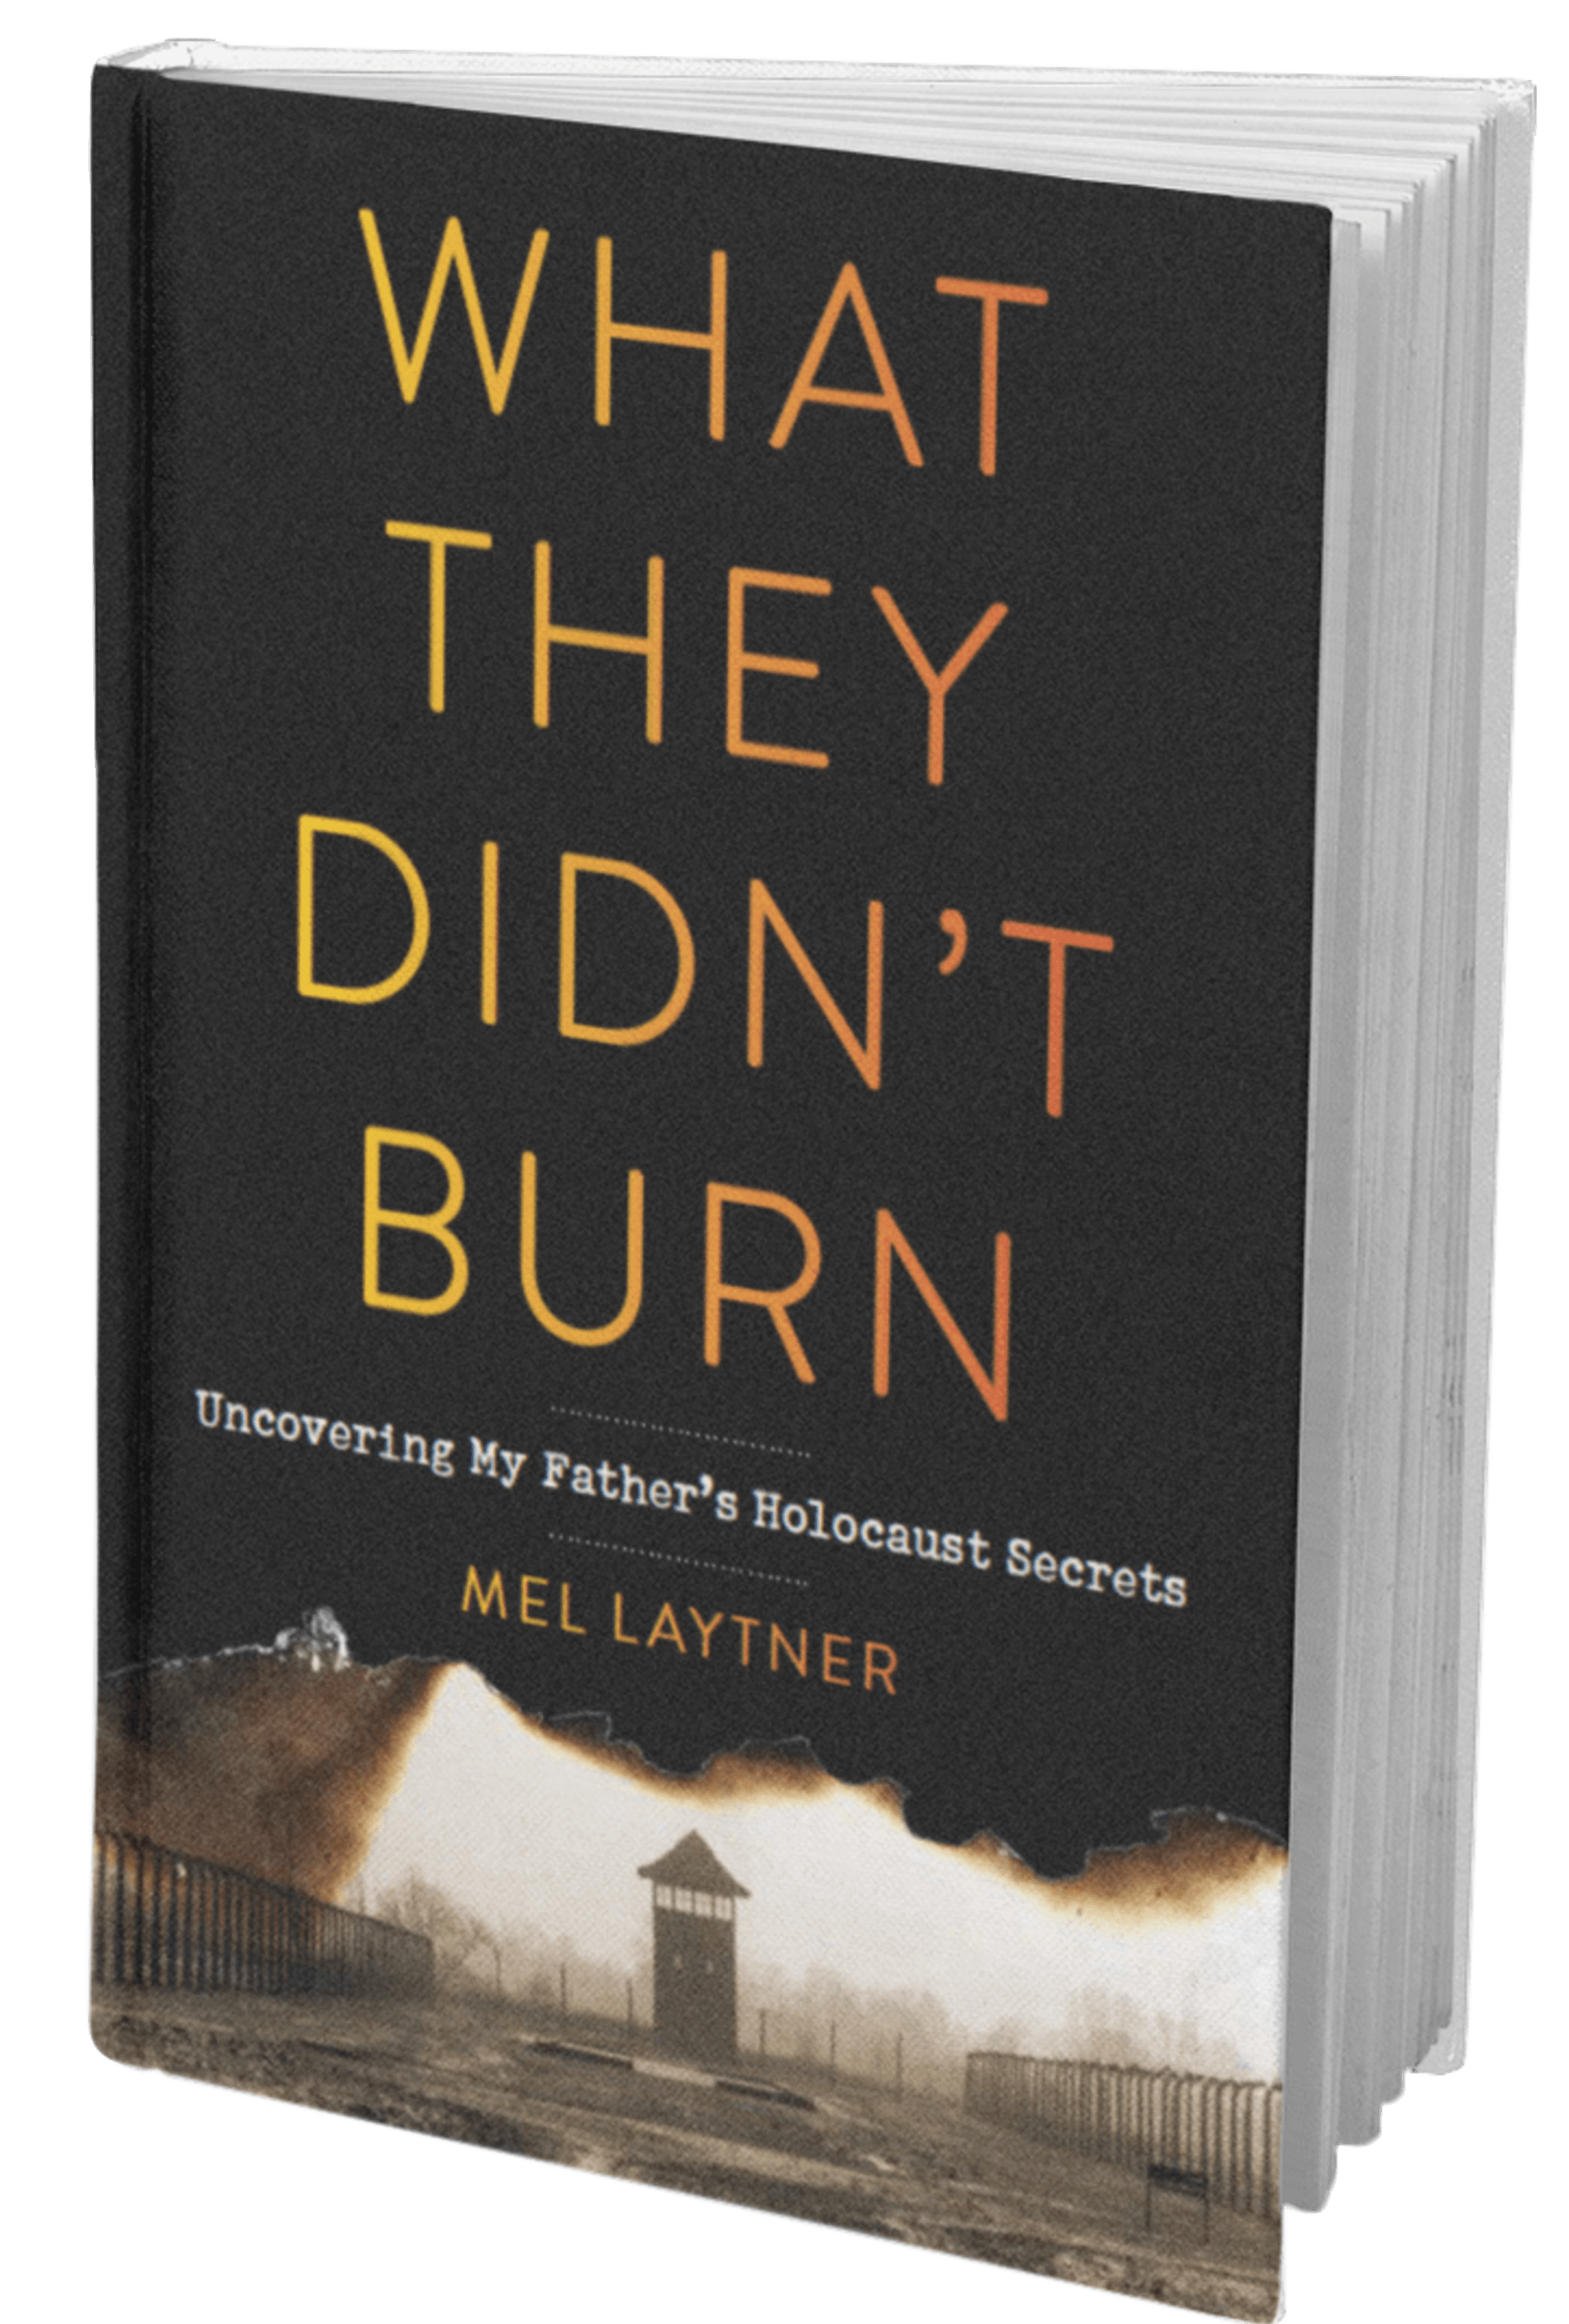 What  They Didn't Burn by Mel Laytner